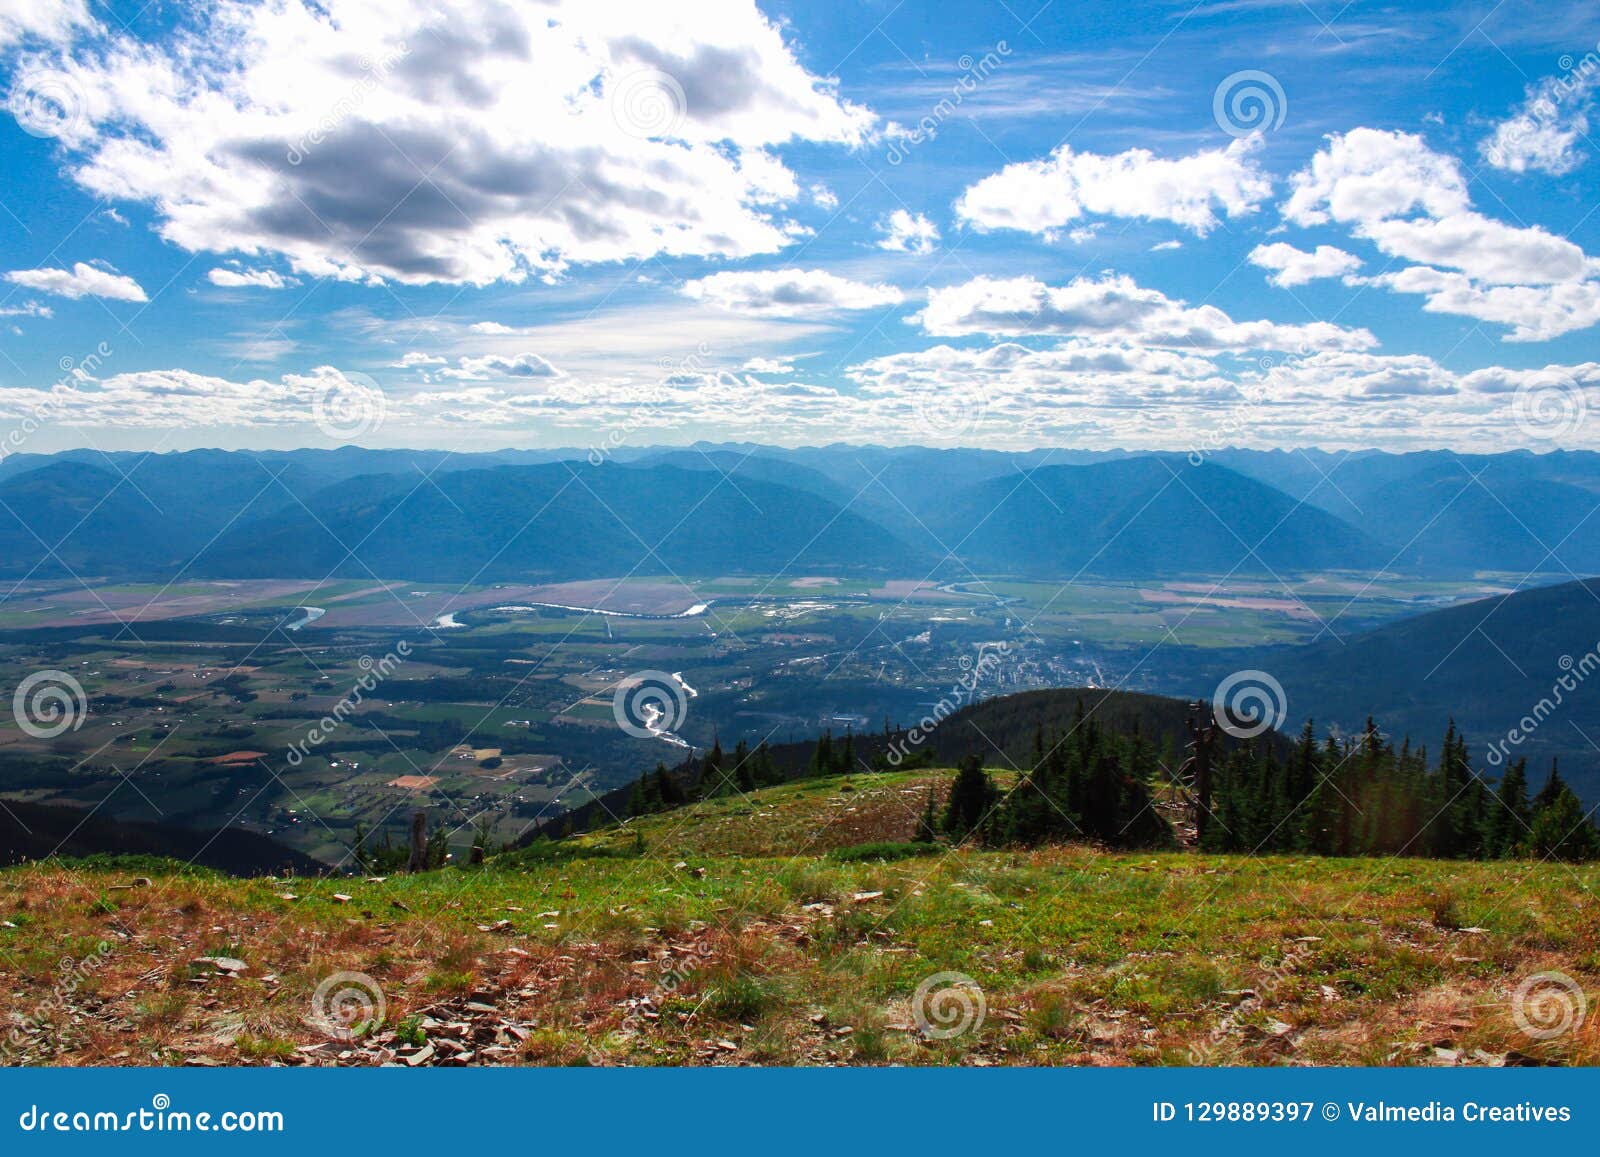 view from the top of a mountain in creston valley, kootenays, bc